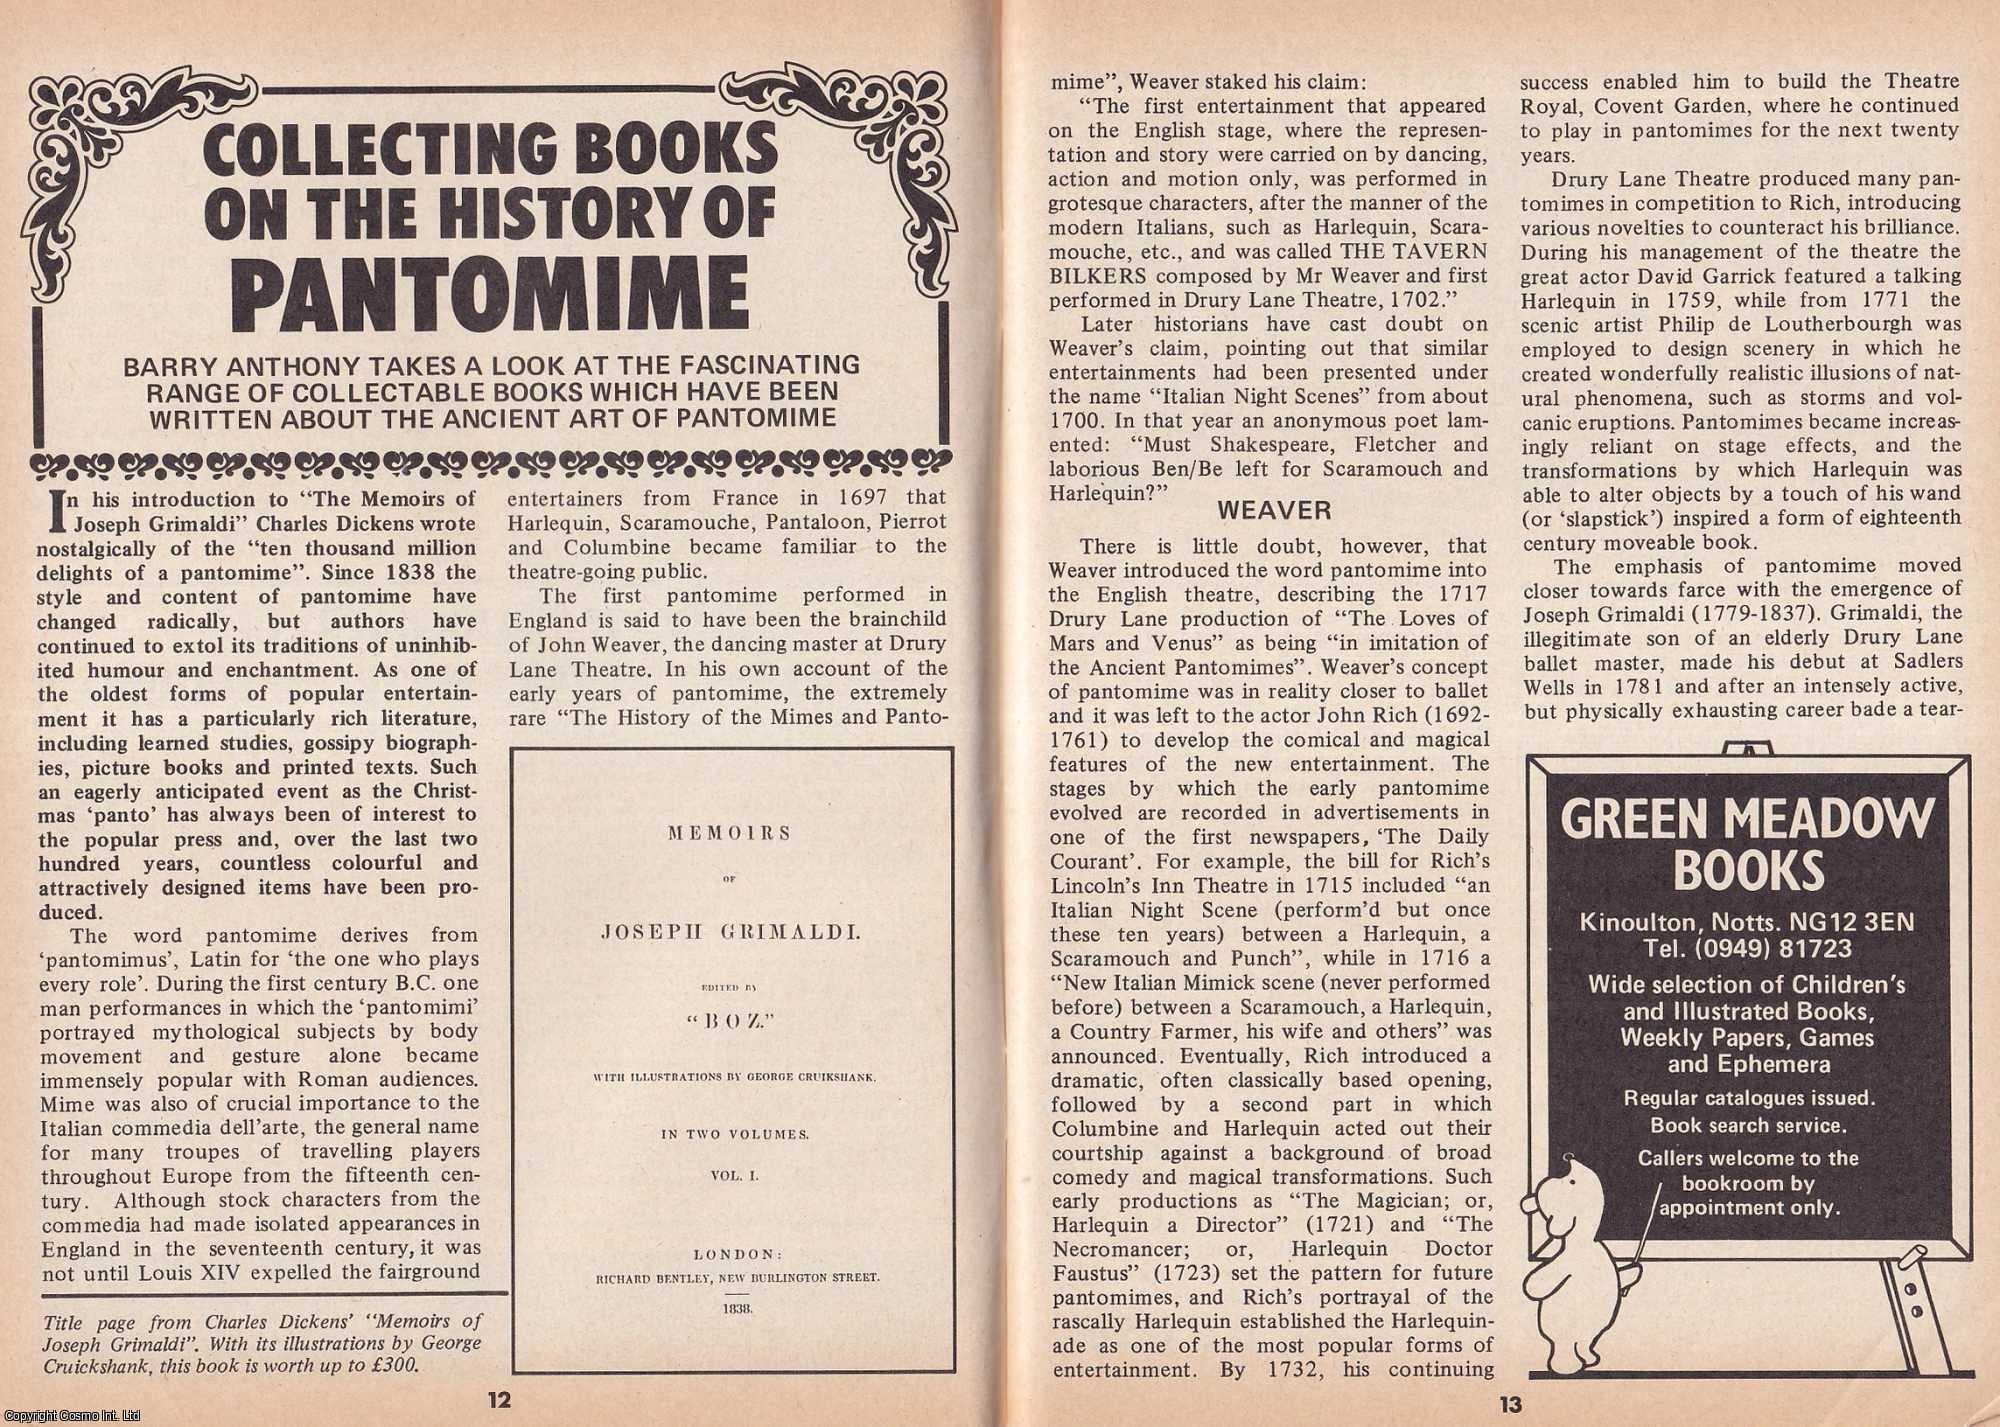 Barry Anthony - Collecting Books on The History of Pantomime. This is an original article separated from an issue of The Book & Magazine Collector publication.